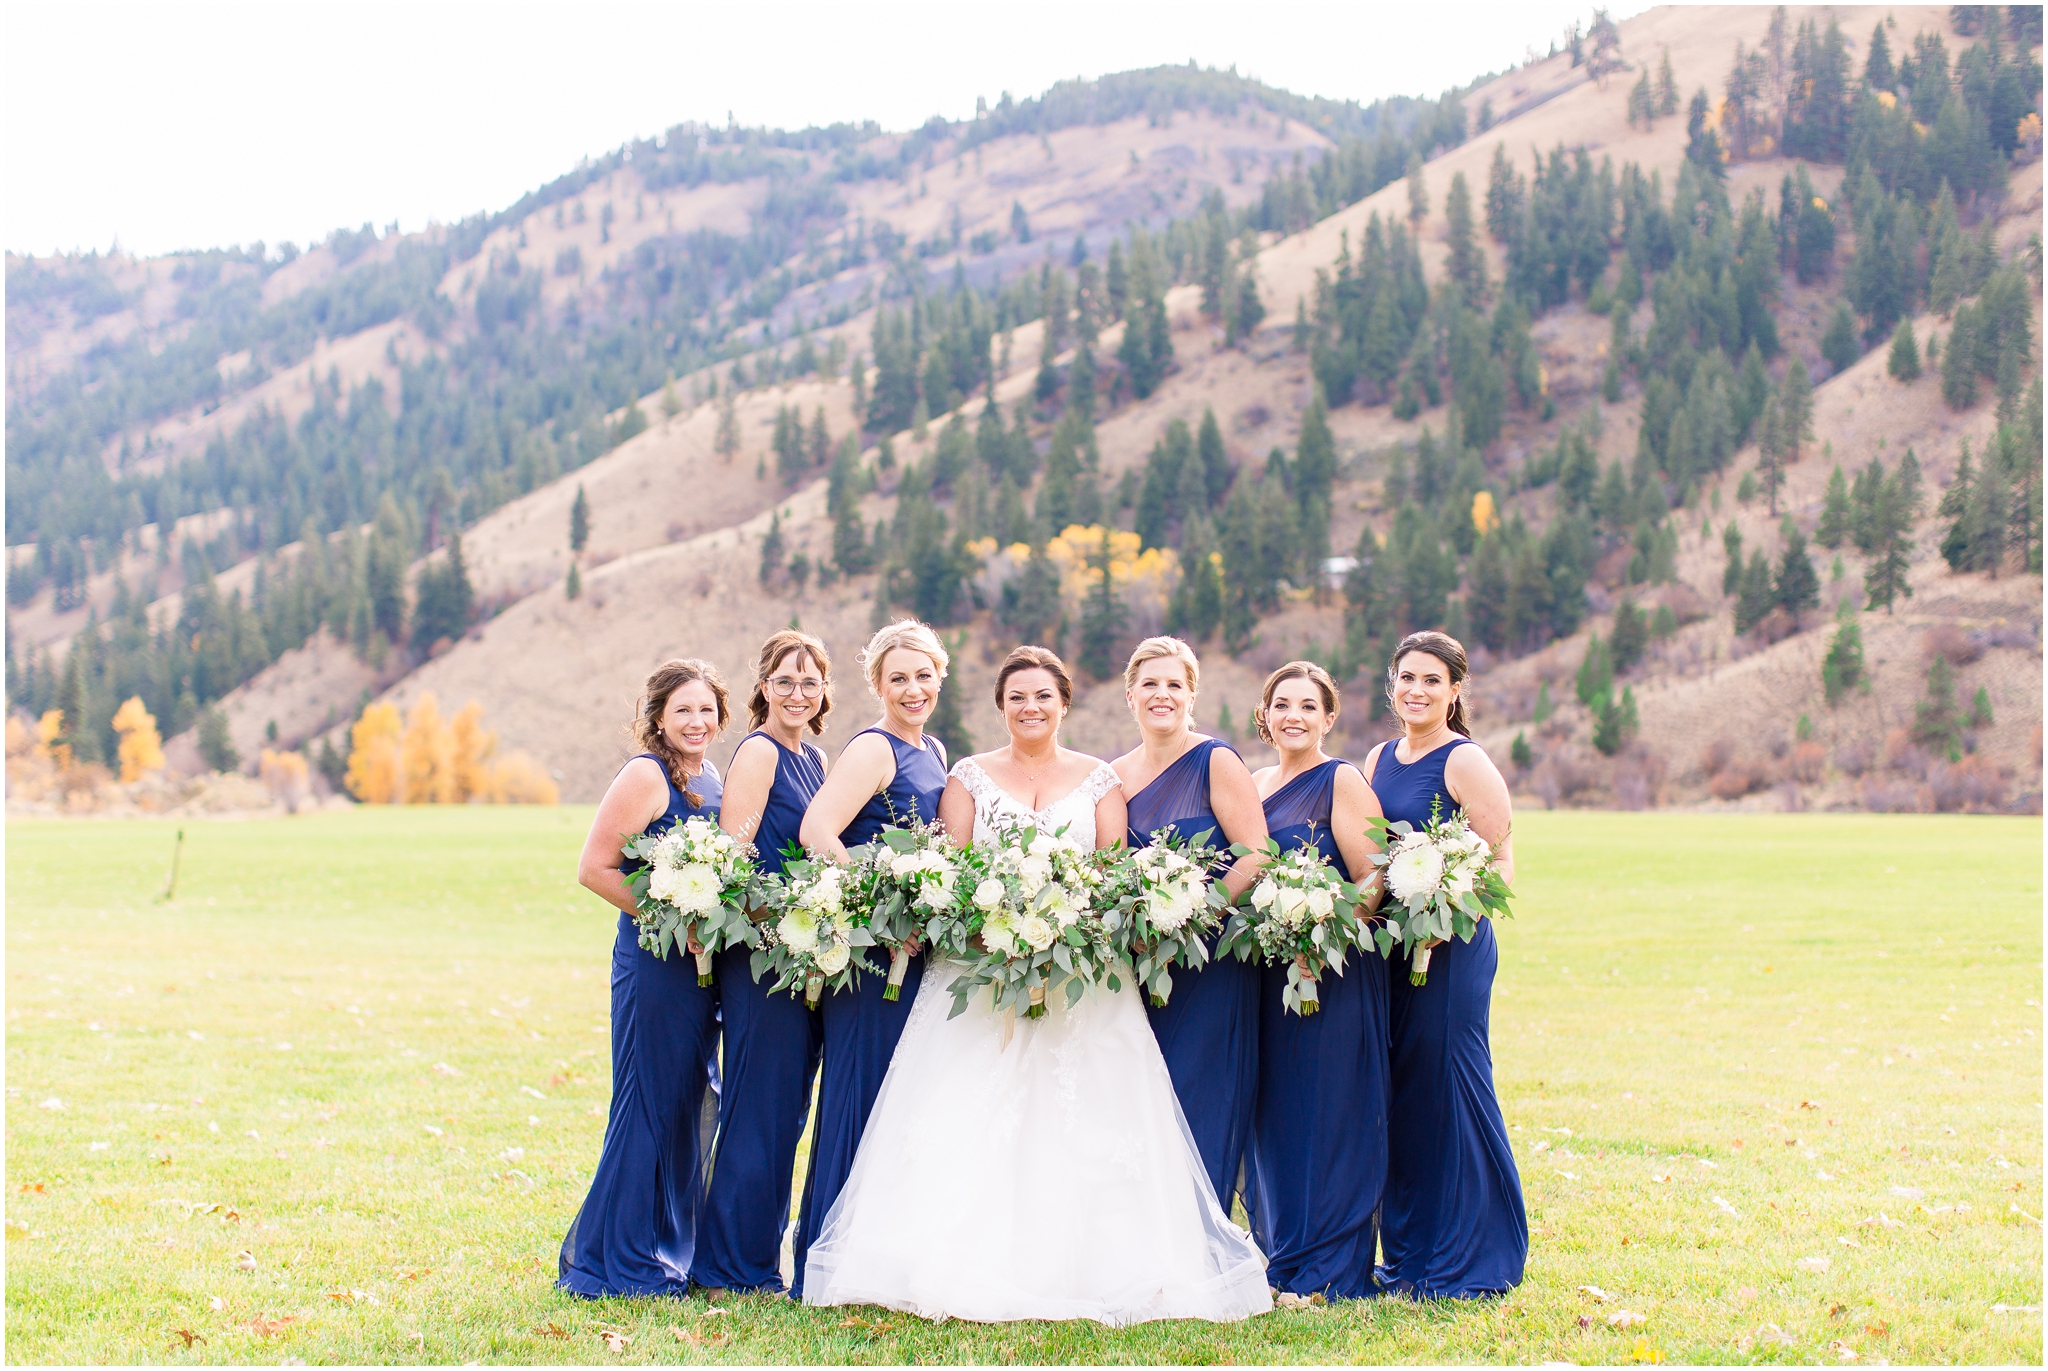 This American Homestead wedding was a Yakima wedding captured by Spokane wedding photographer Taylor Rose Photography at one of the best Yakima wedding venues, the American Homestead. Taylor Rose Photography is a Northern Virginia Wedding photographer and DC wedding photographer capturing weddings, engagement sessions and anniversaries across the U.S. and beyond. Navy bridesmaid dresses